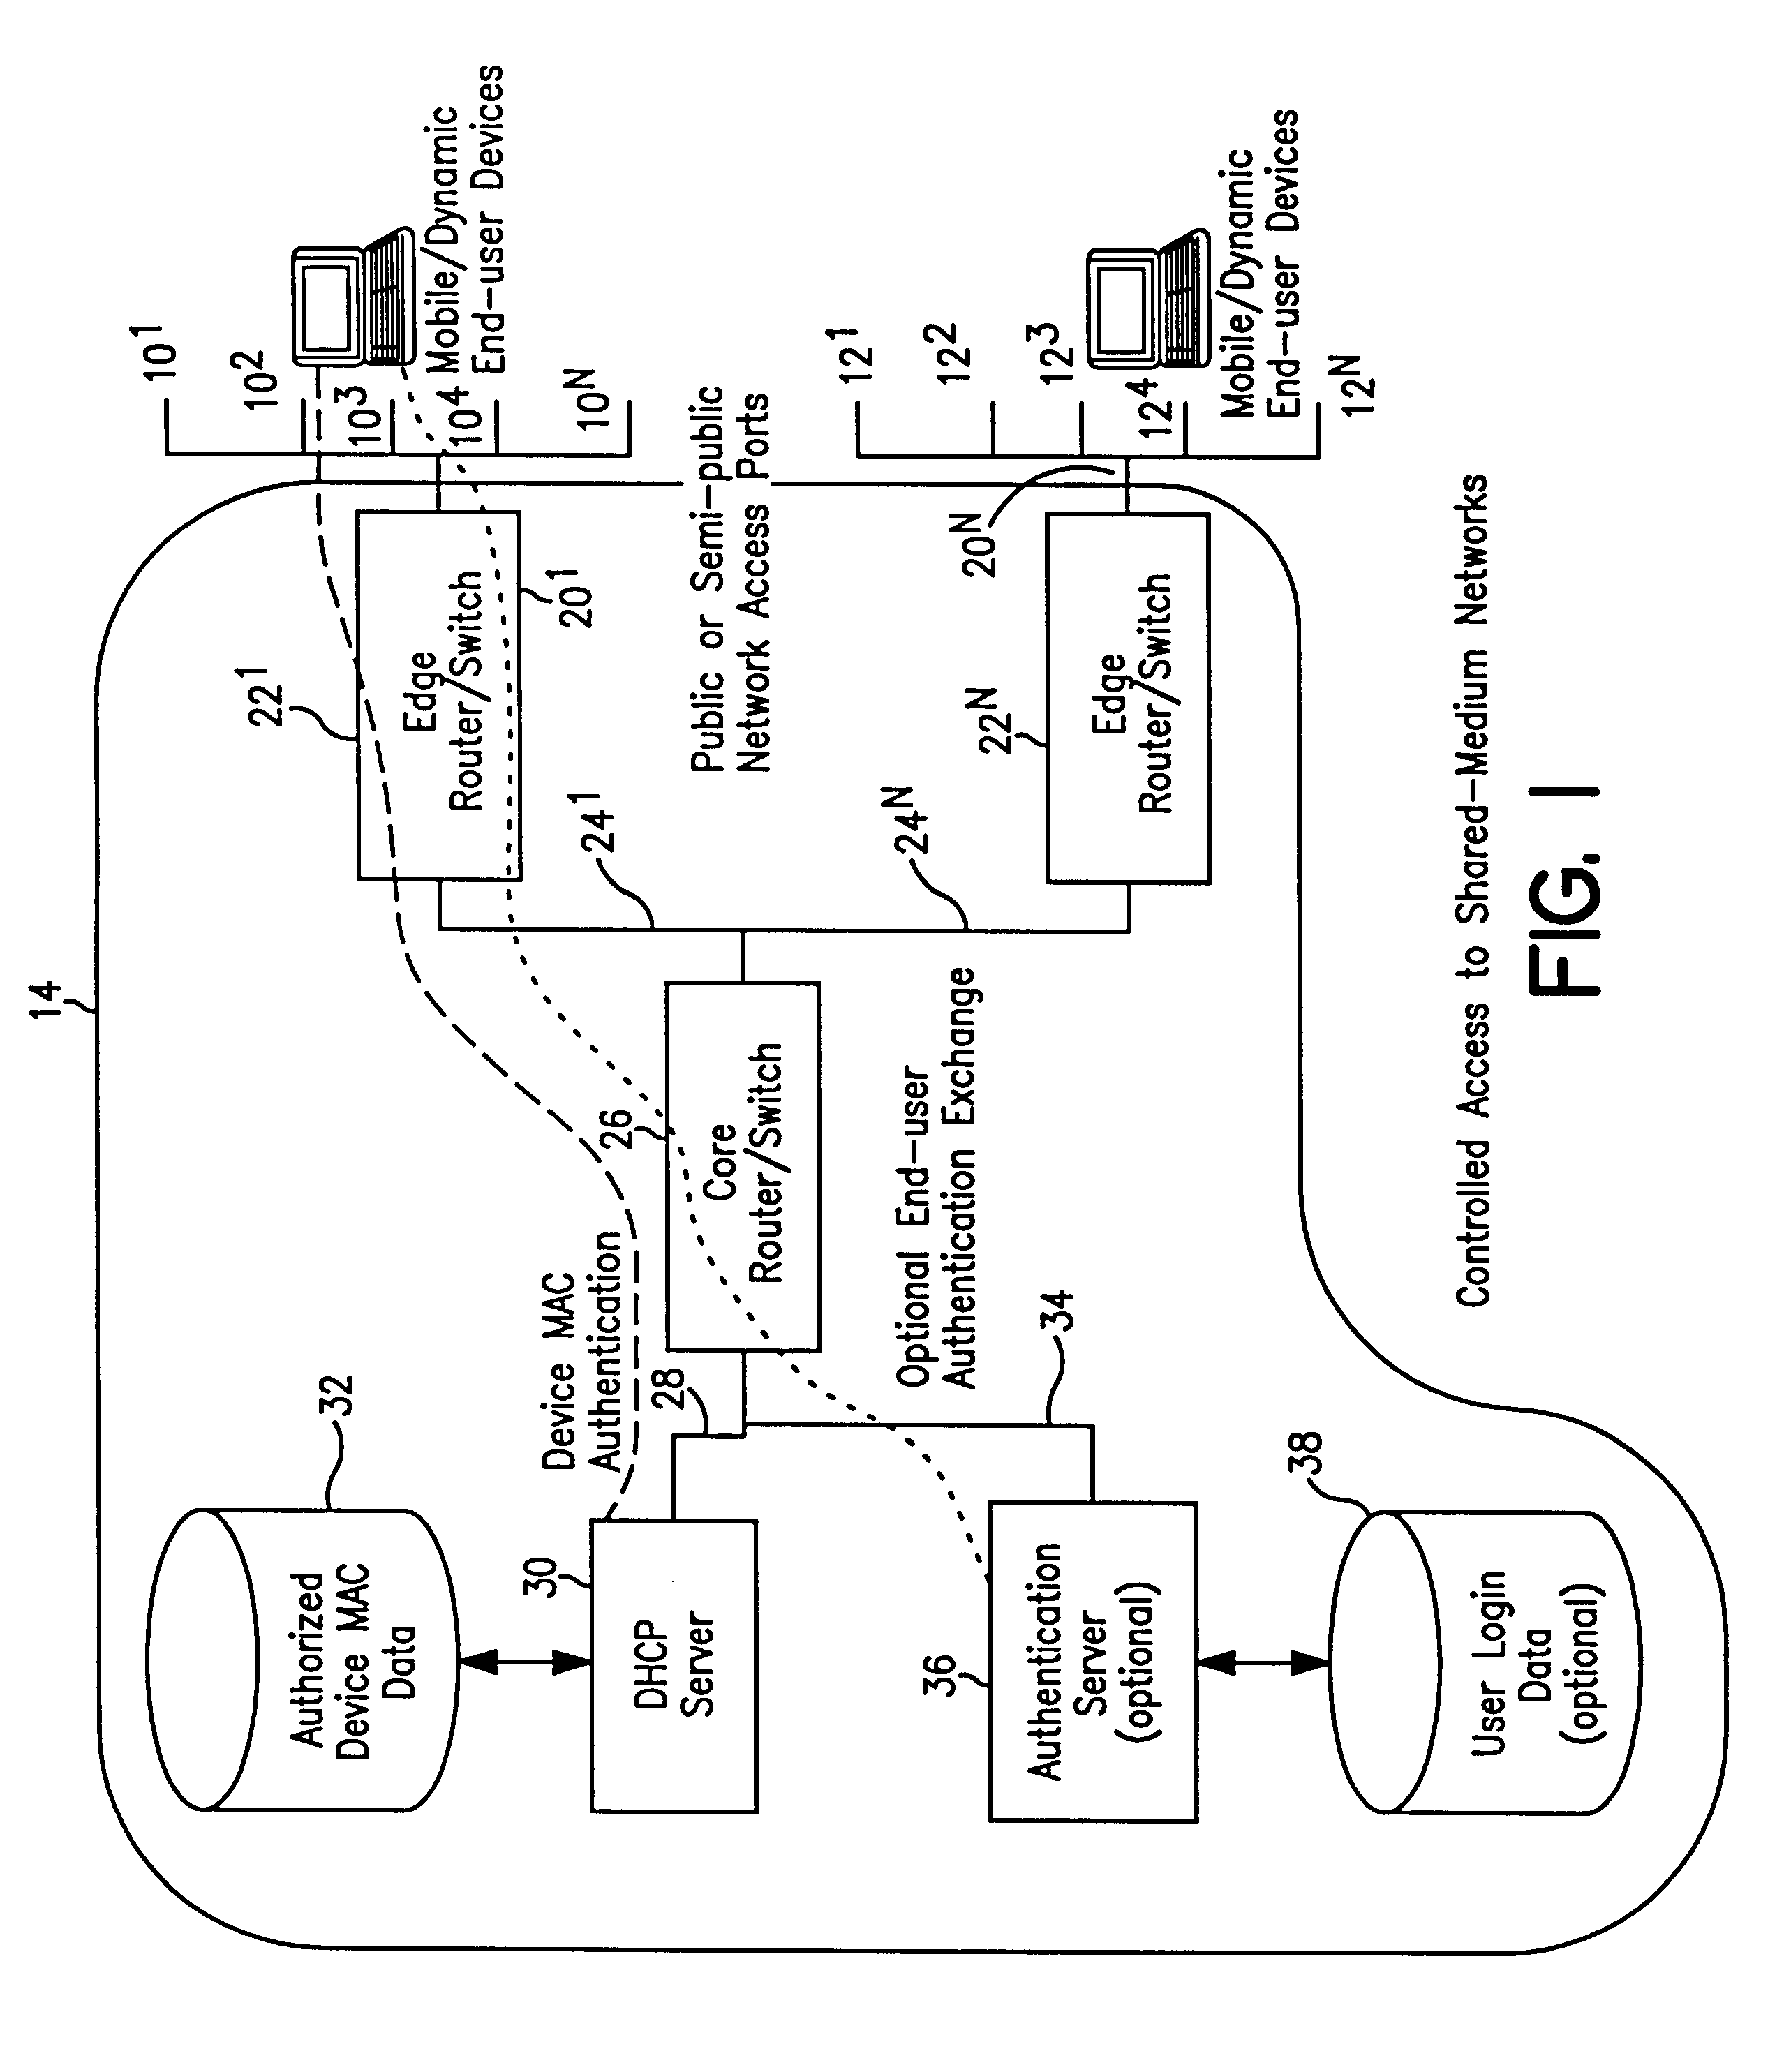 System and method for controlled access to shared-medium public and semi-public internet protocol (IP) networks